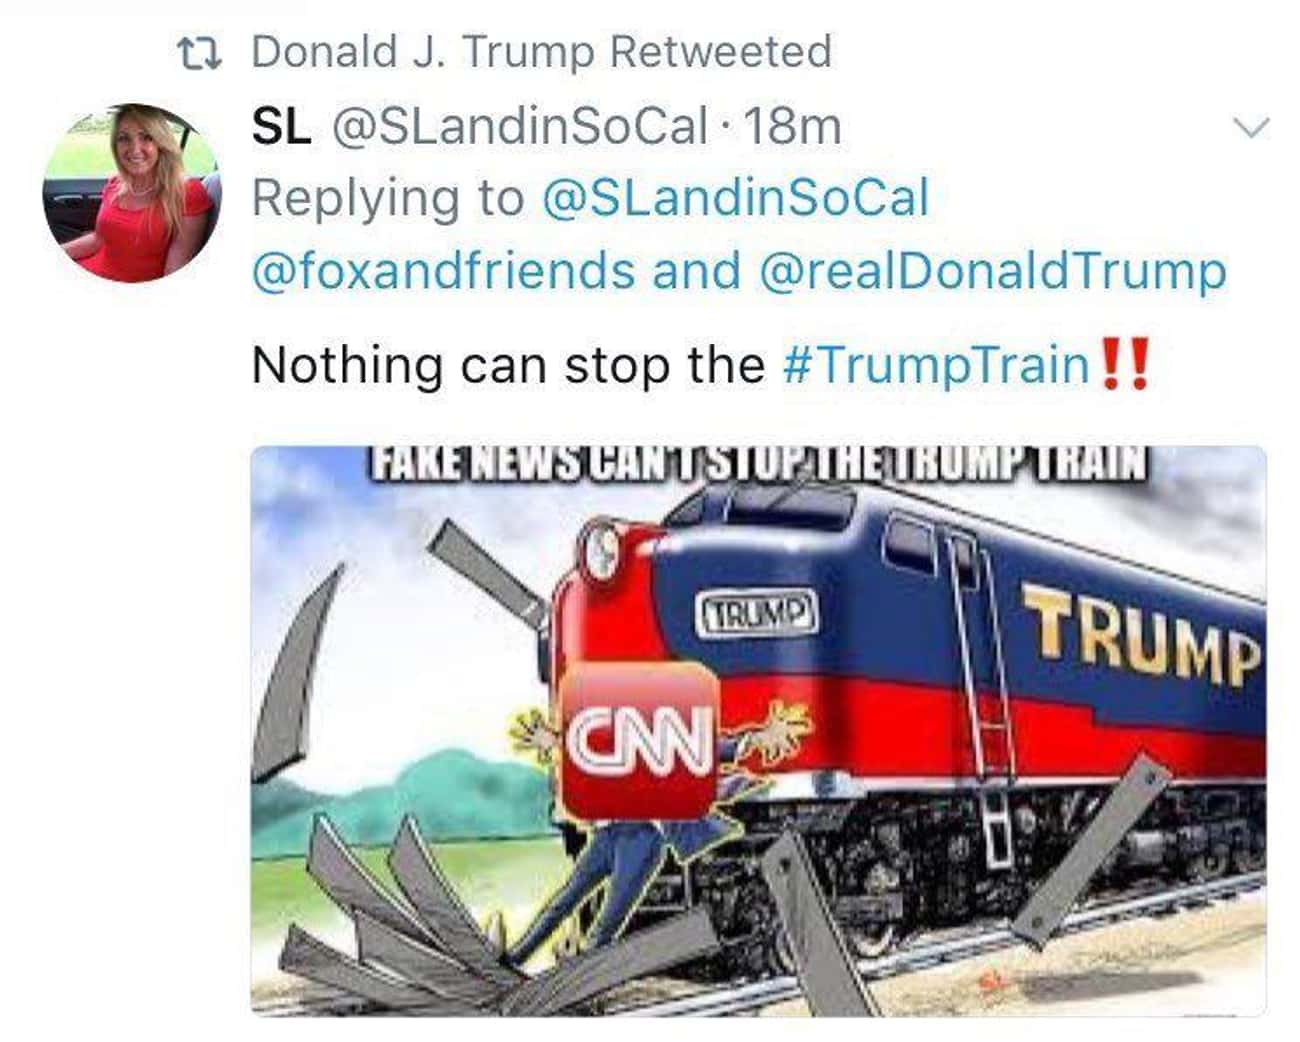 Trump Retweeted A Picture Of A Train Hitting A Reporter Days After Violence In Charlottesville